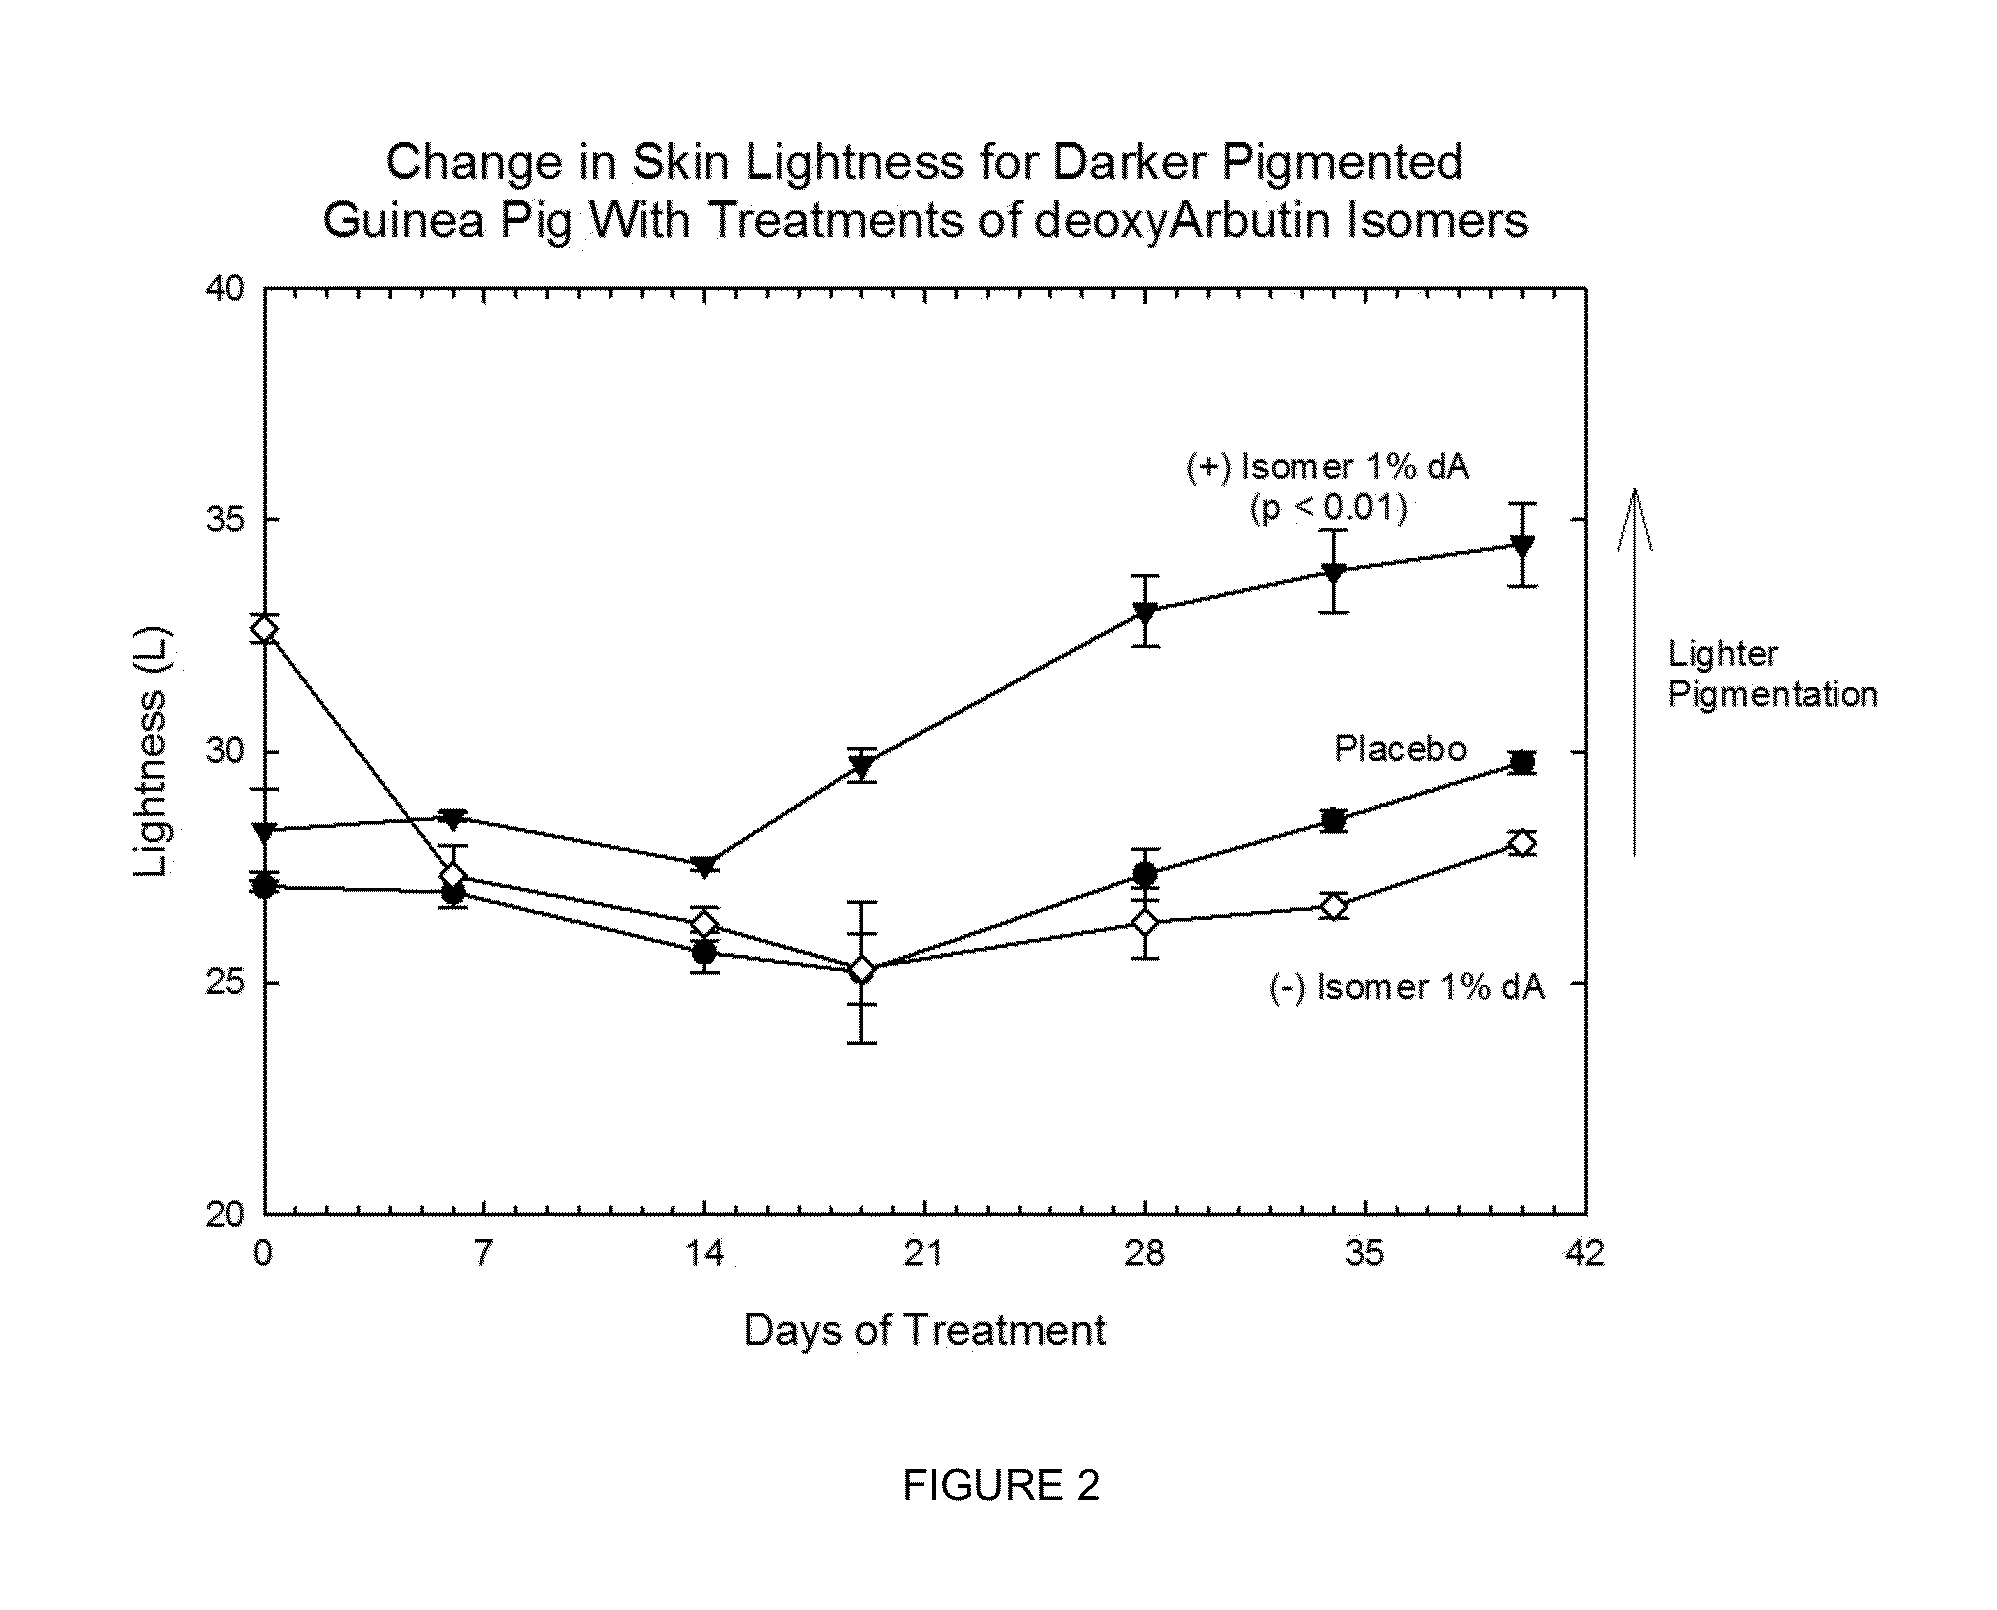 Chiral compounds, compositions, products and methods employing same